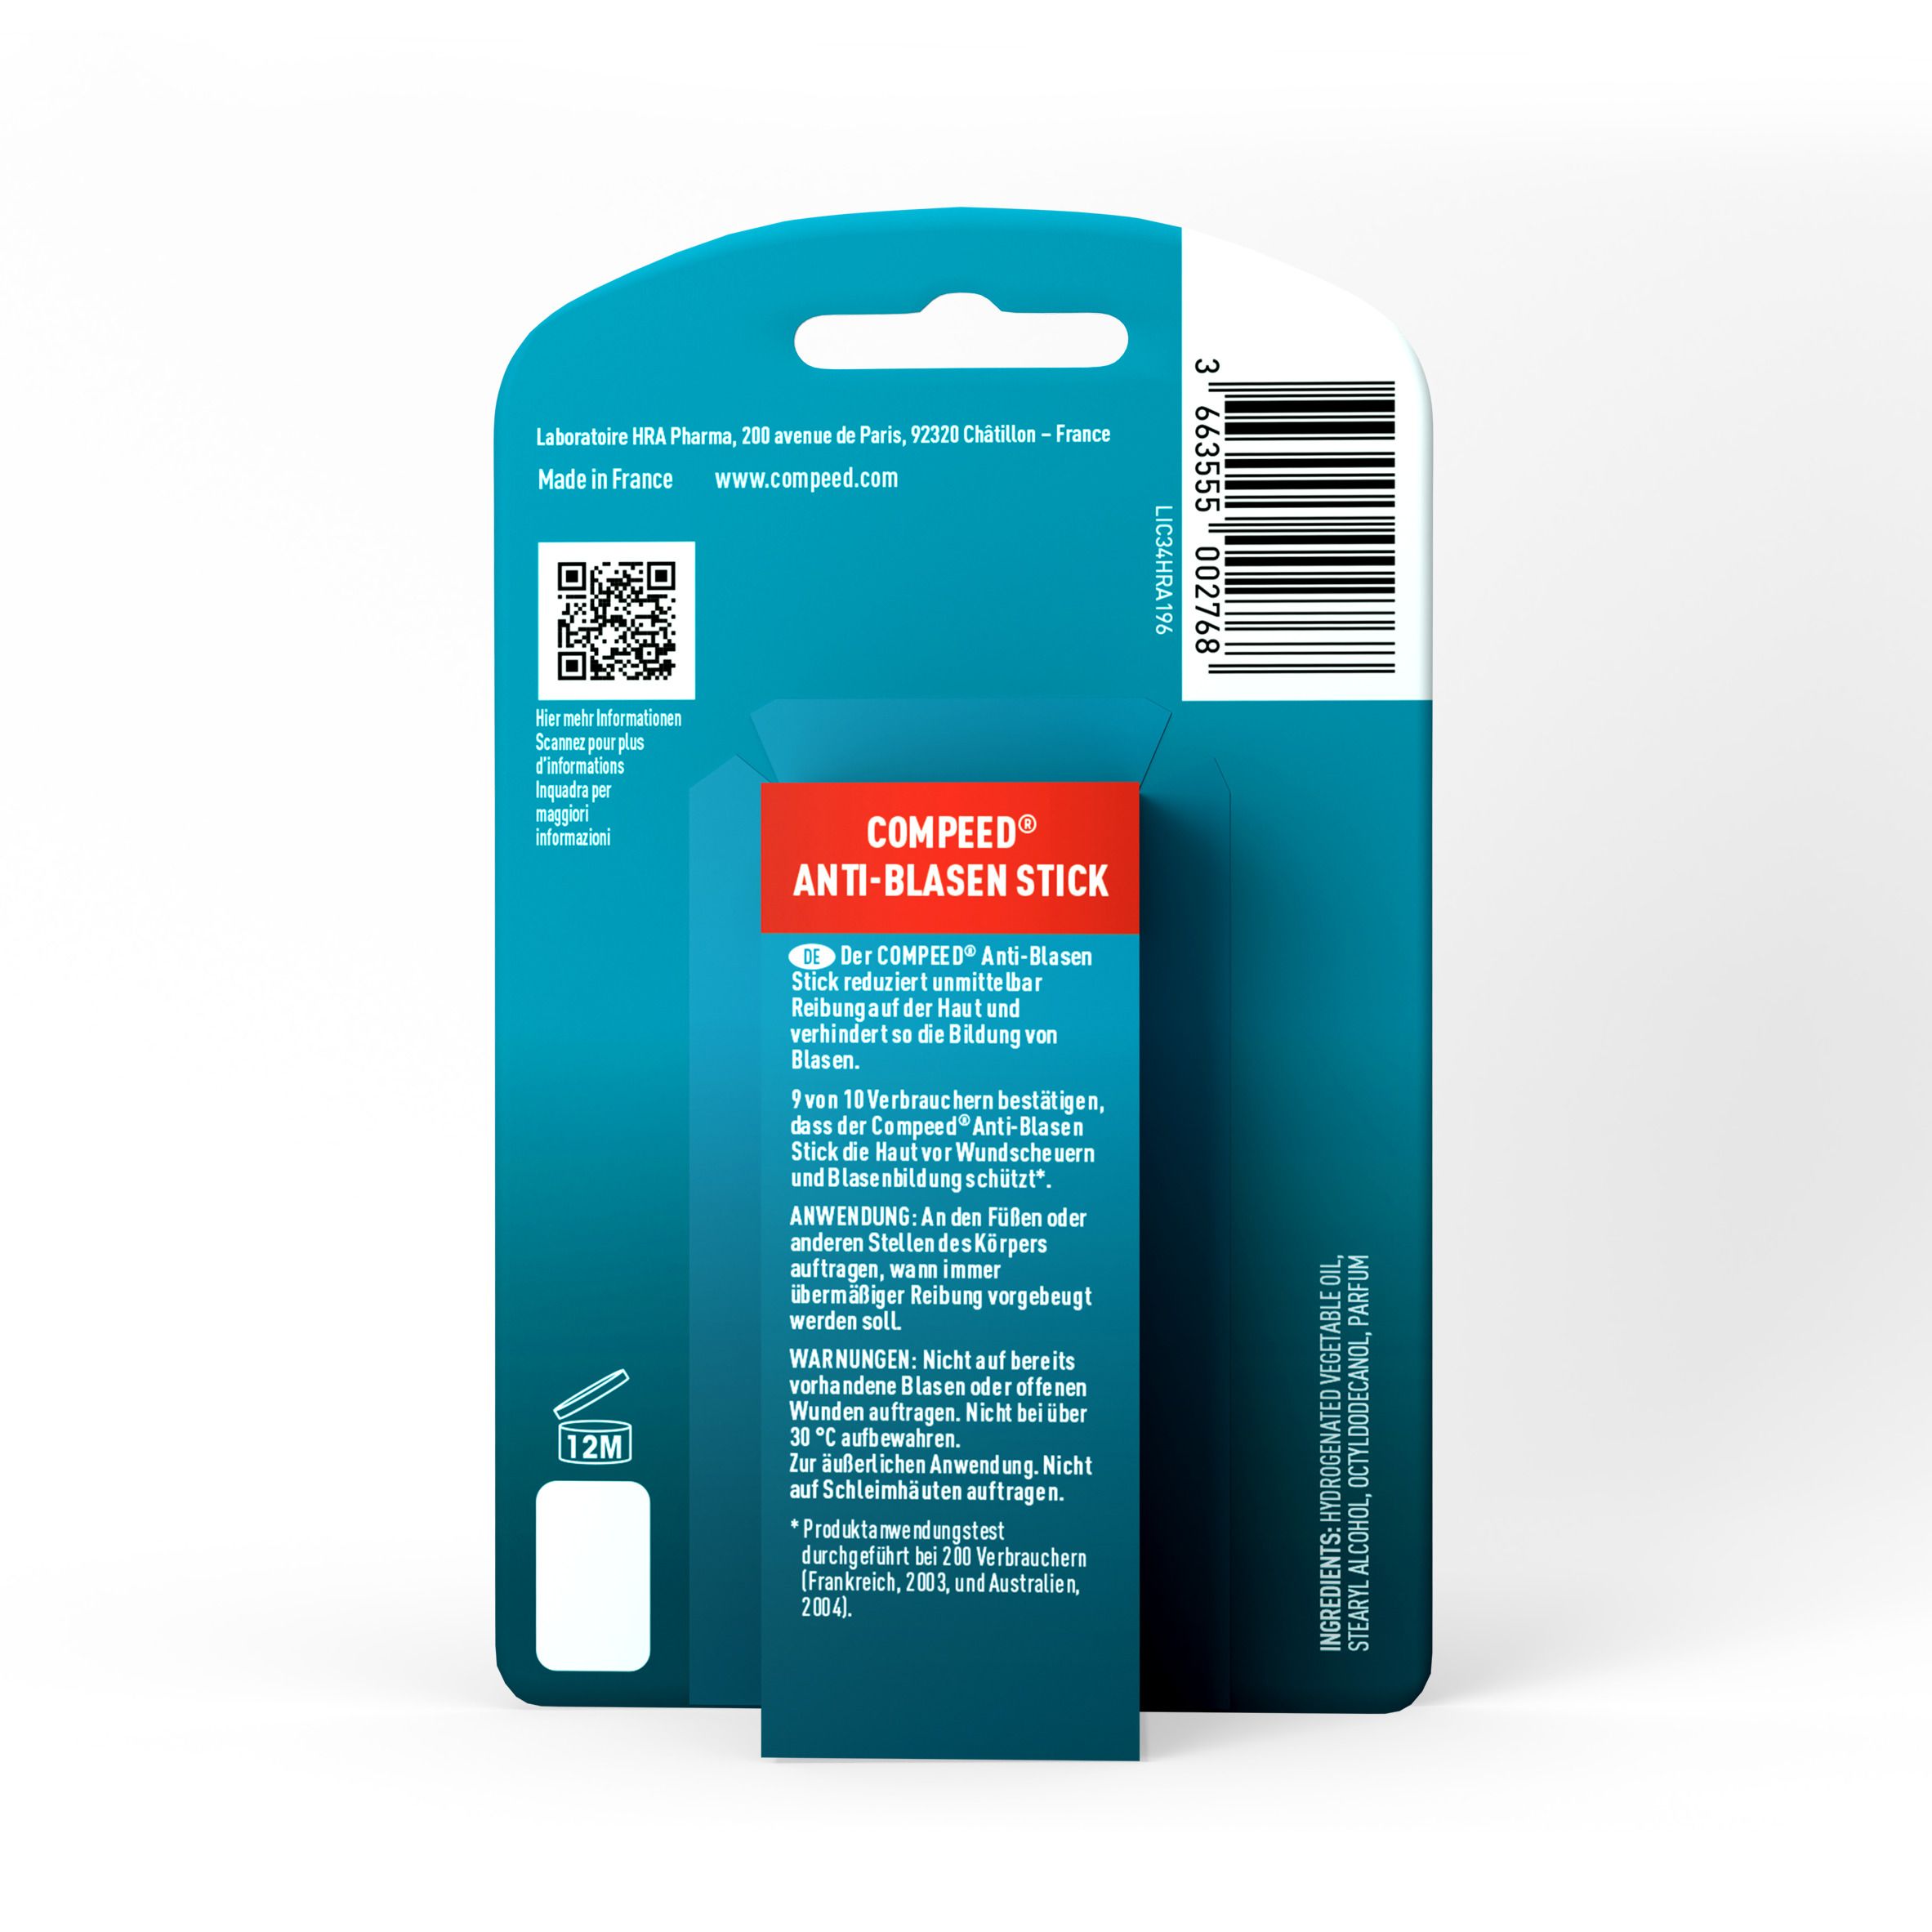 COMPEED® Stick Anti-Ampoules